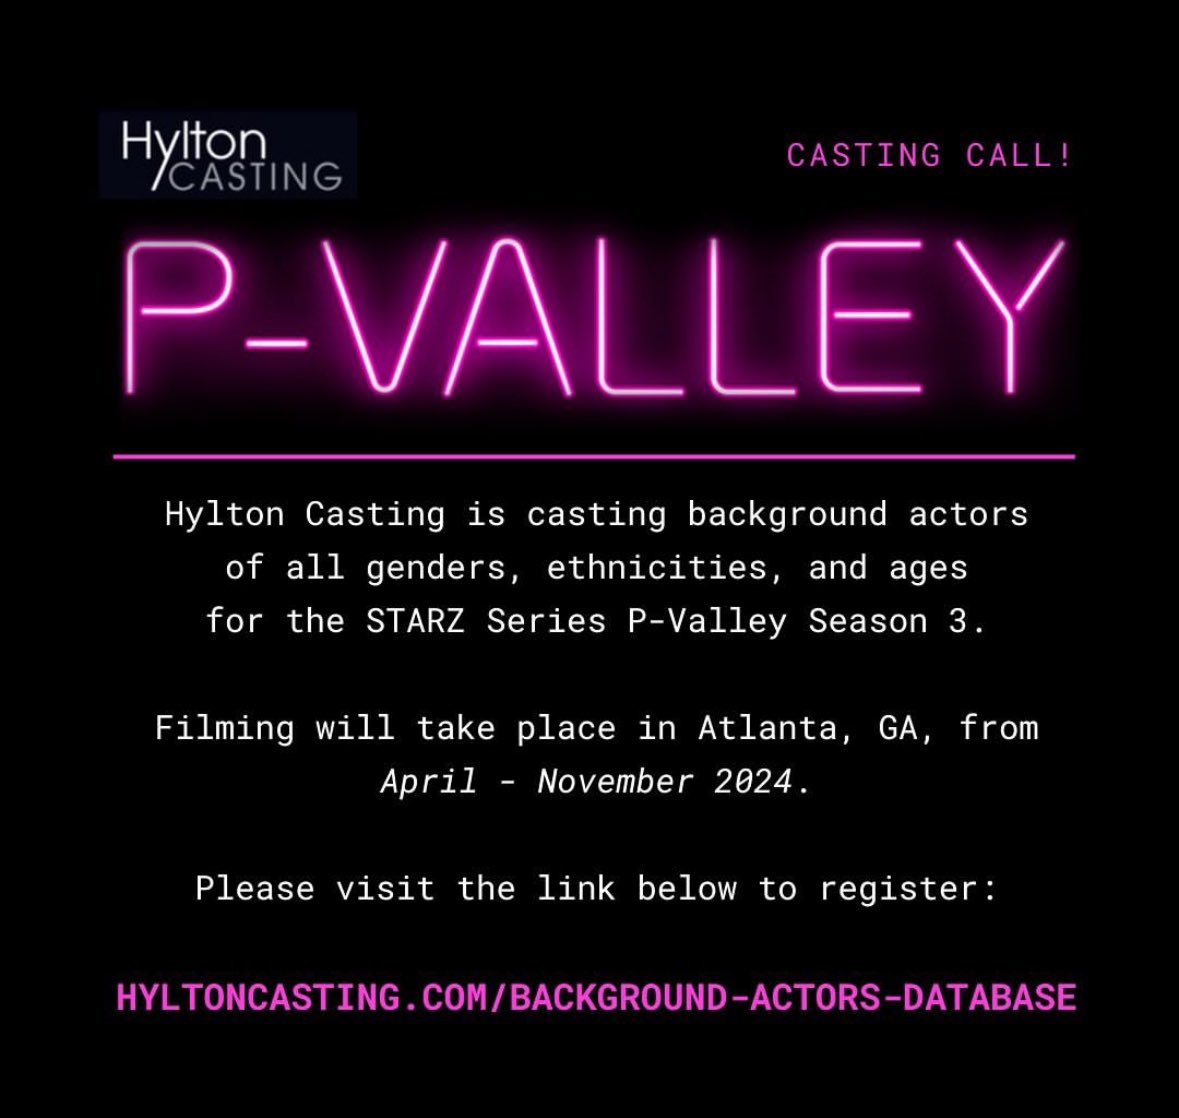 Hylton Casting is casting background actors of all genders, ethnicities, and ages for the Starz TV series P-Valley Season 3. Filming will take place in Atlanta, GA and surrounding areas from April - November 2024. To submit, please visit link hyltoncasting.com